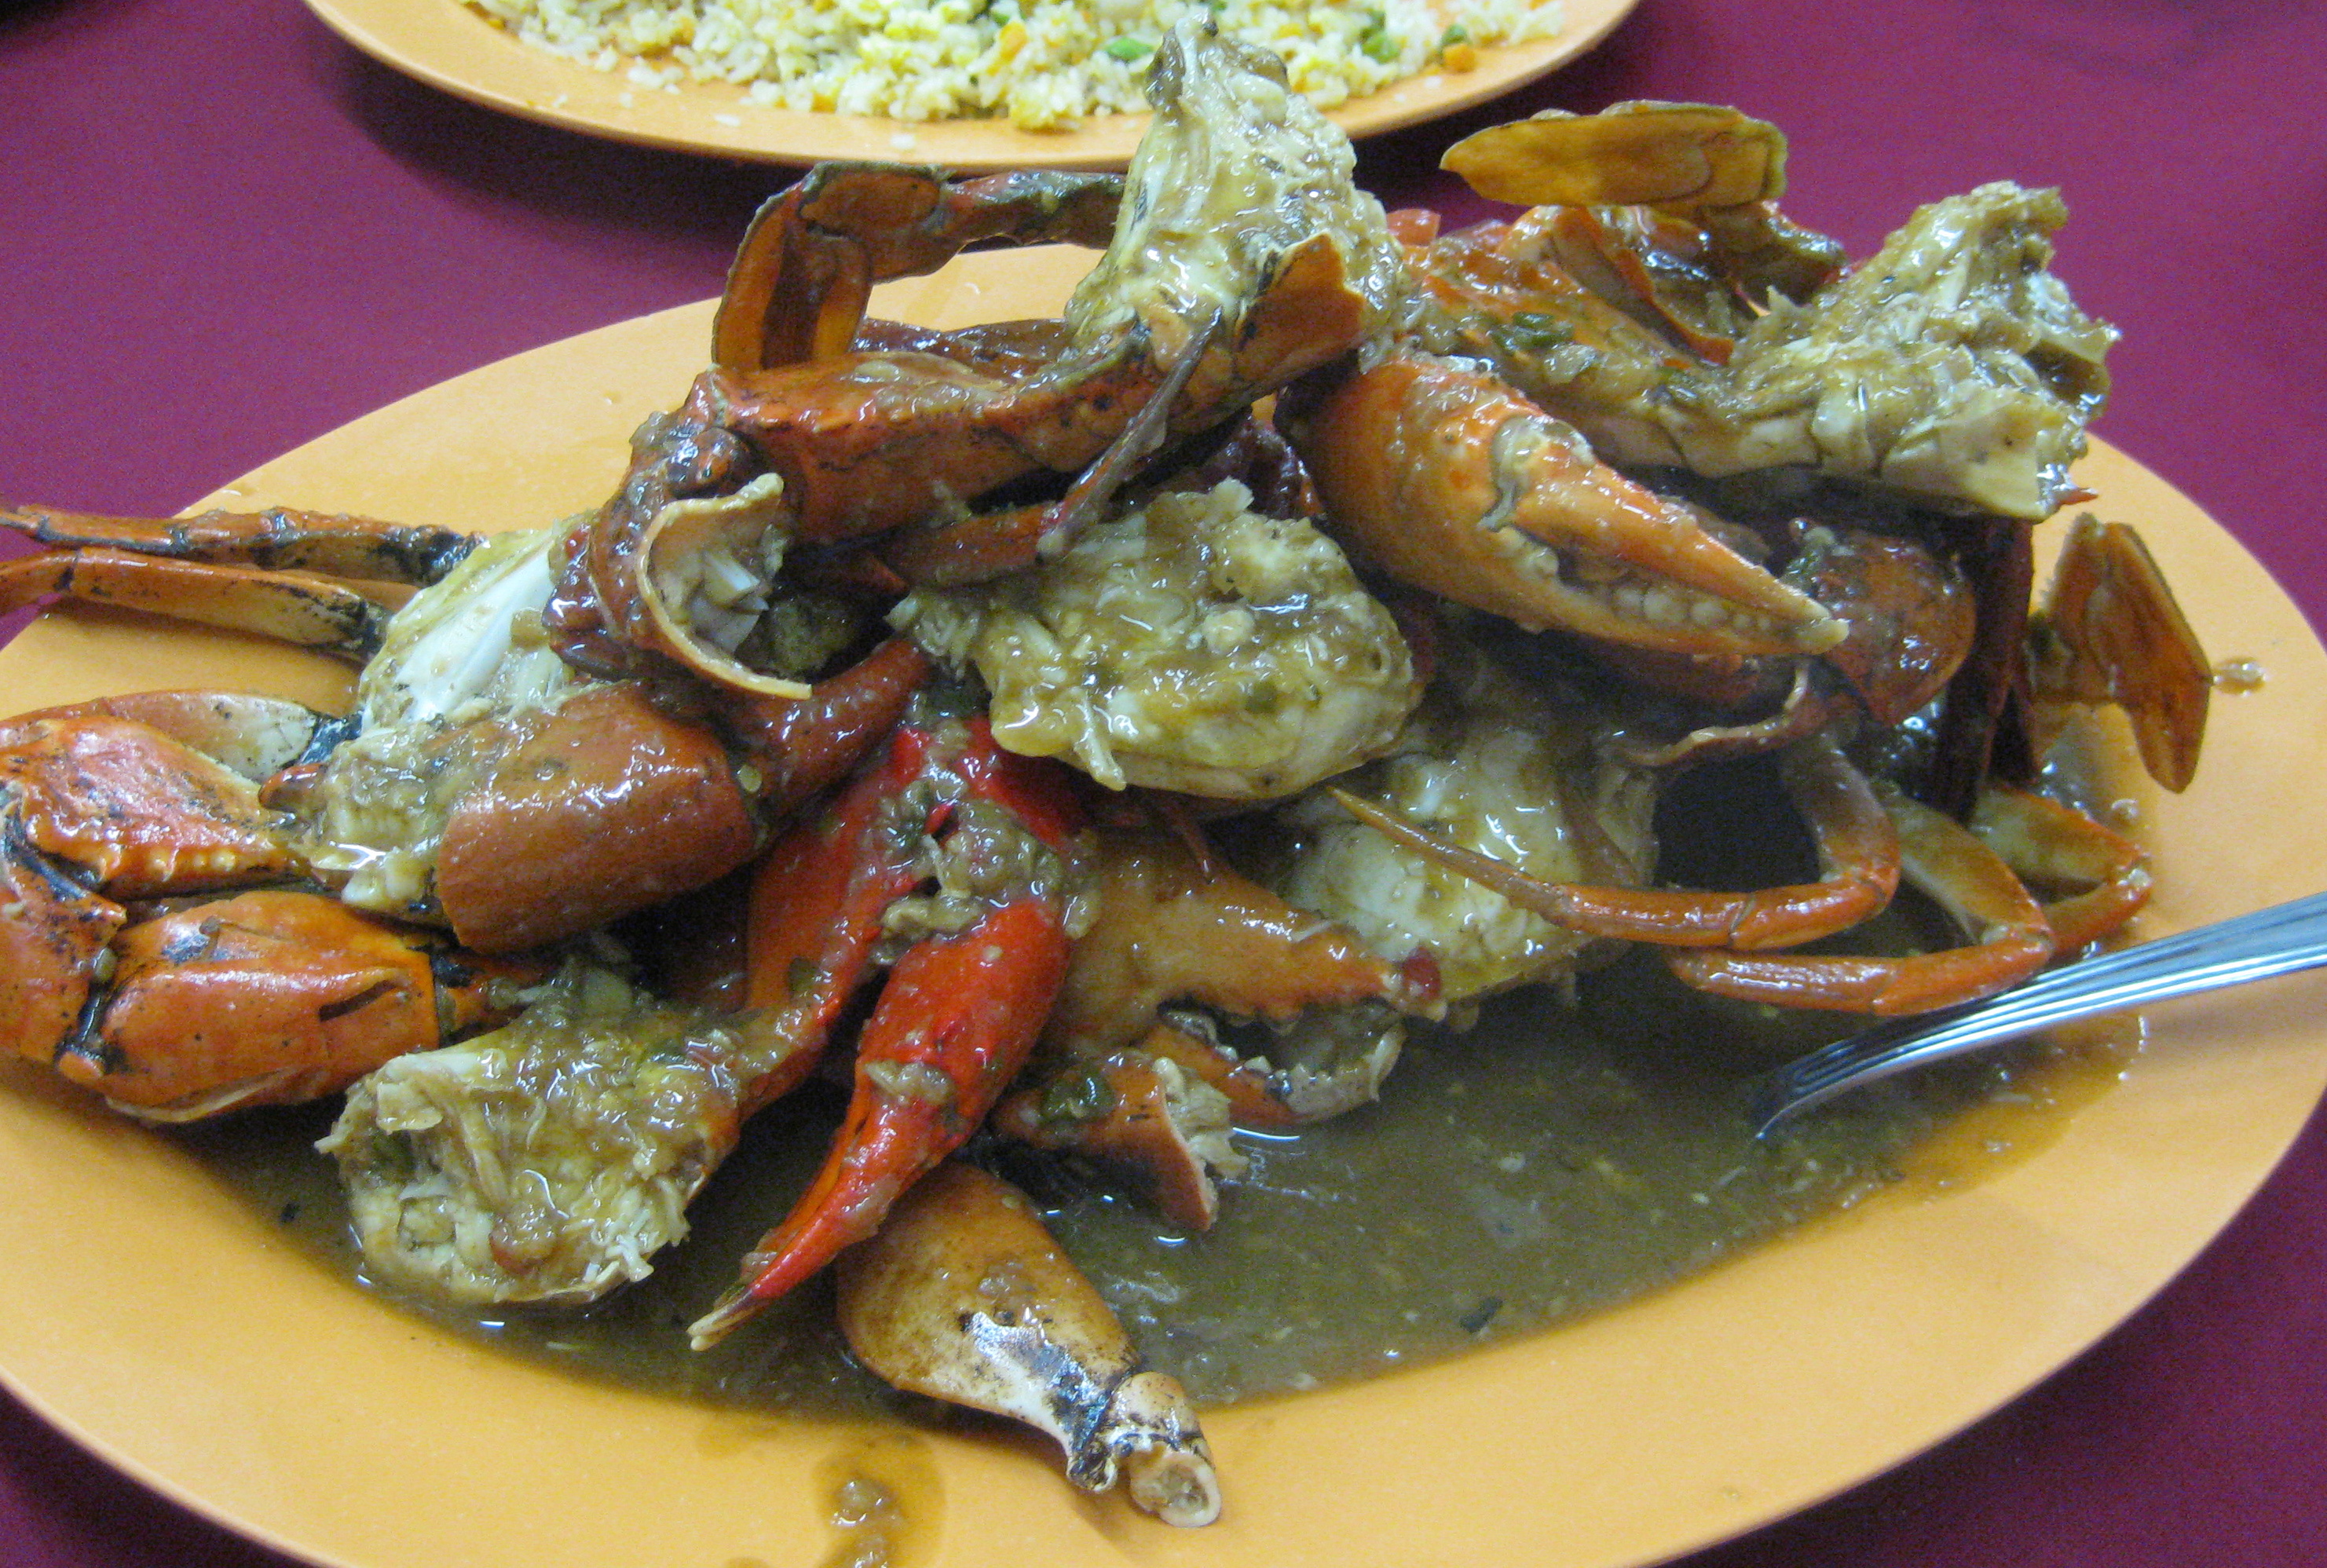 Fatty crab in kl